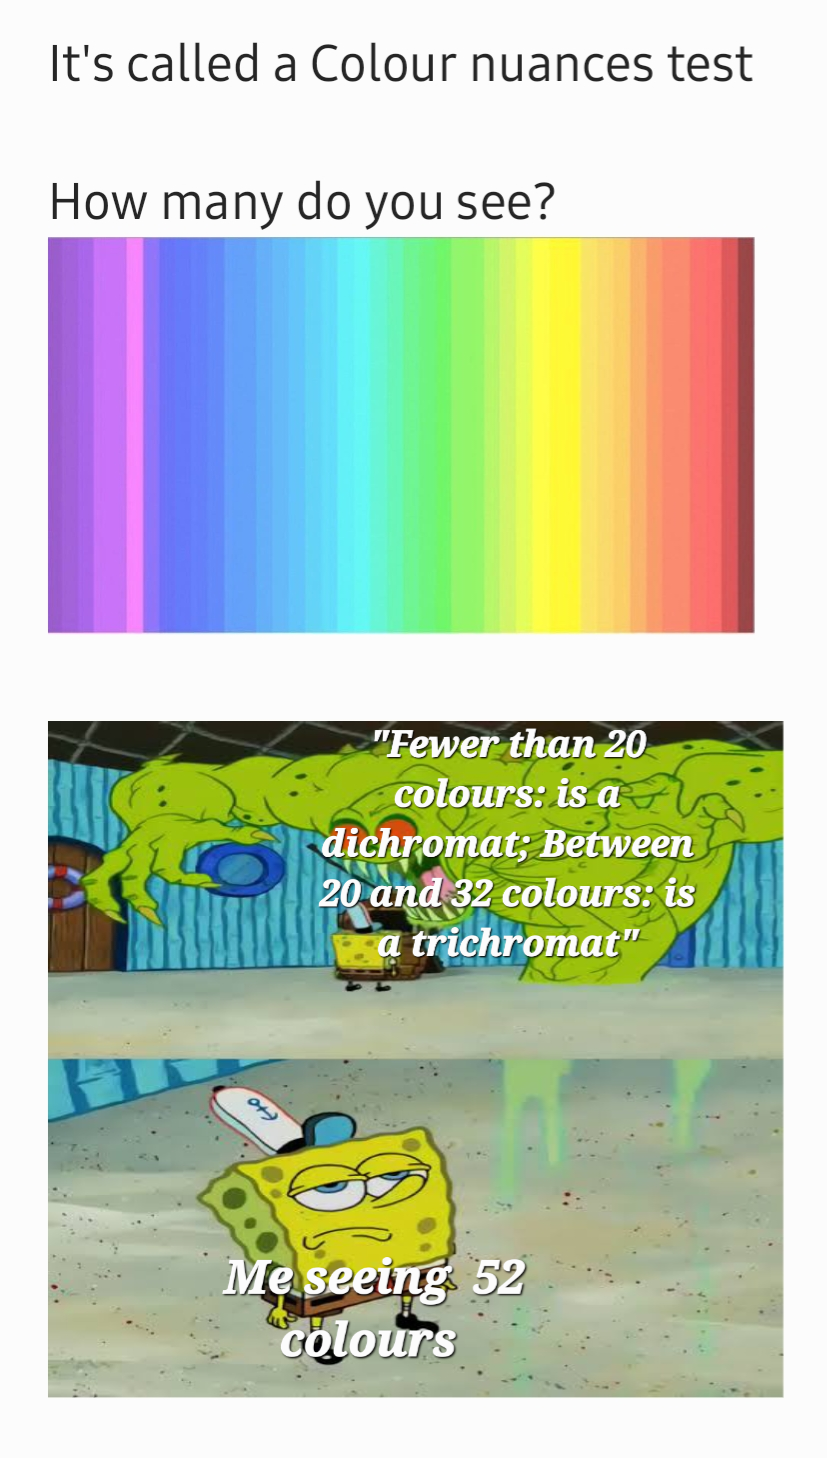 Me seeing 52 colours